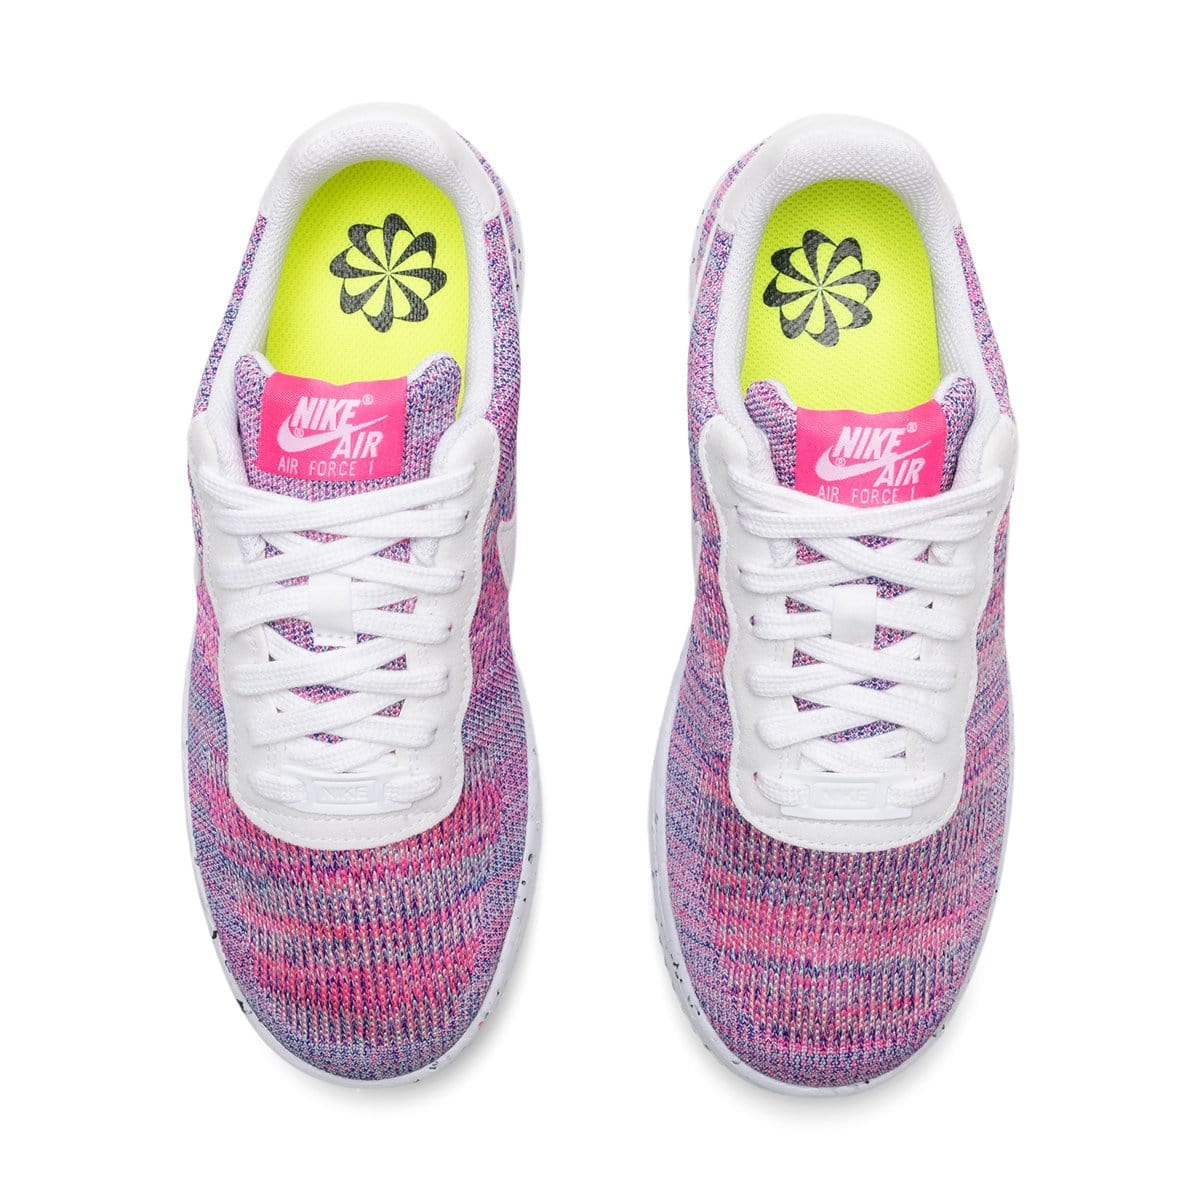 Nike WOMEN'S AIR FORCE 1 CRATER FLYKNIT [DC7273-500]